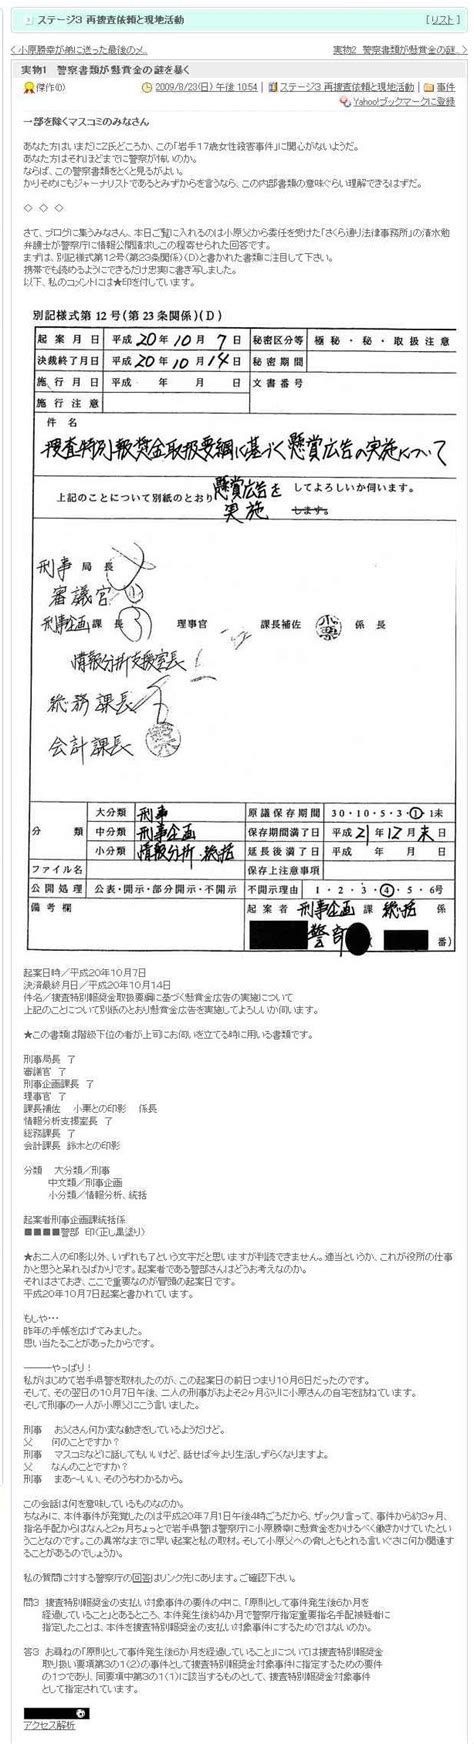 Manage your video collection and share your thoughts. 復元【3-34】実物1 警察書類が懸賞金の謎を暴く 2009.8.23 - 黒木 ...